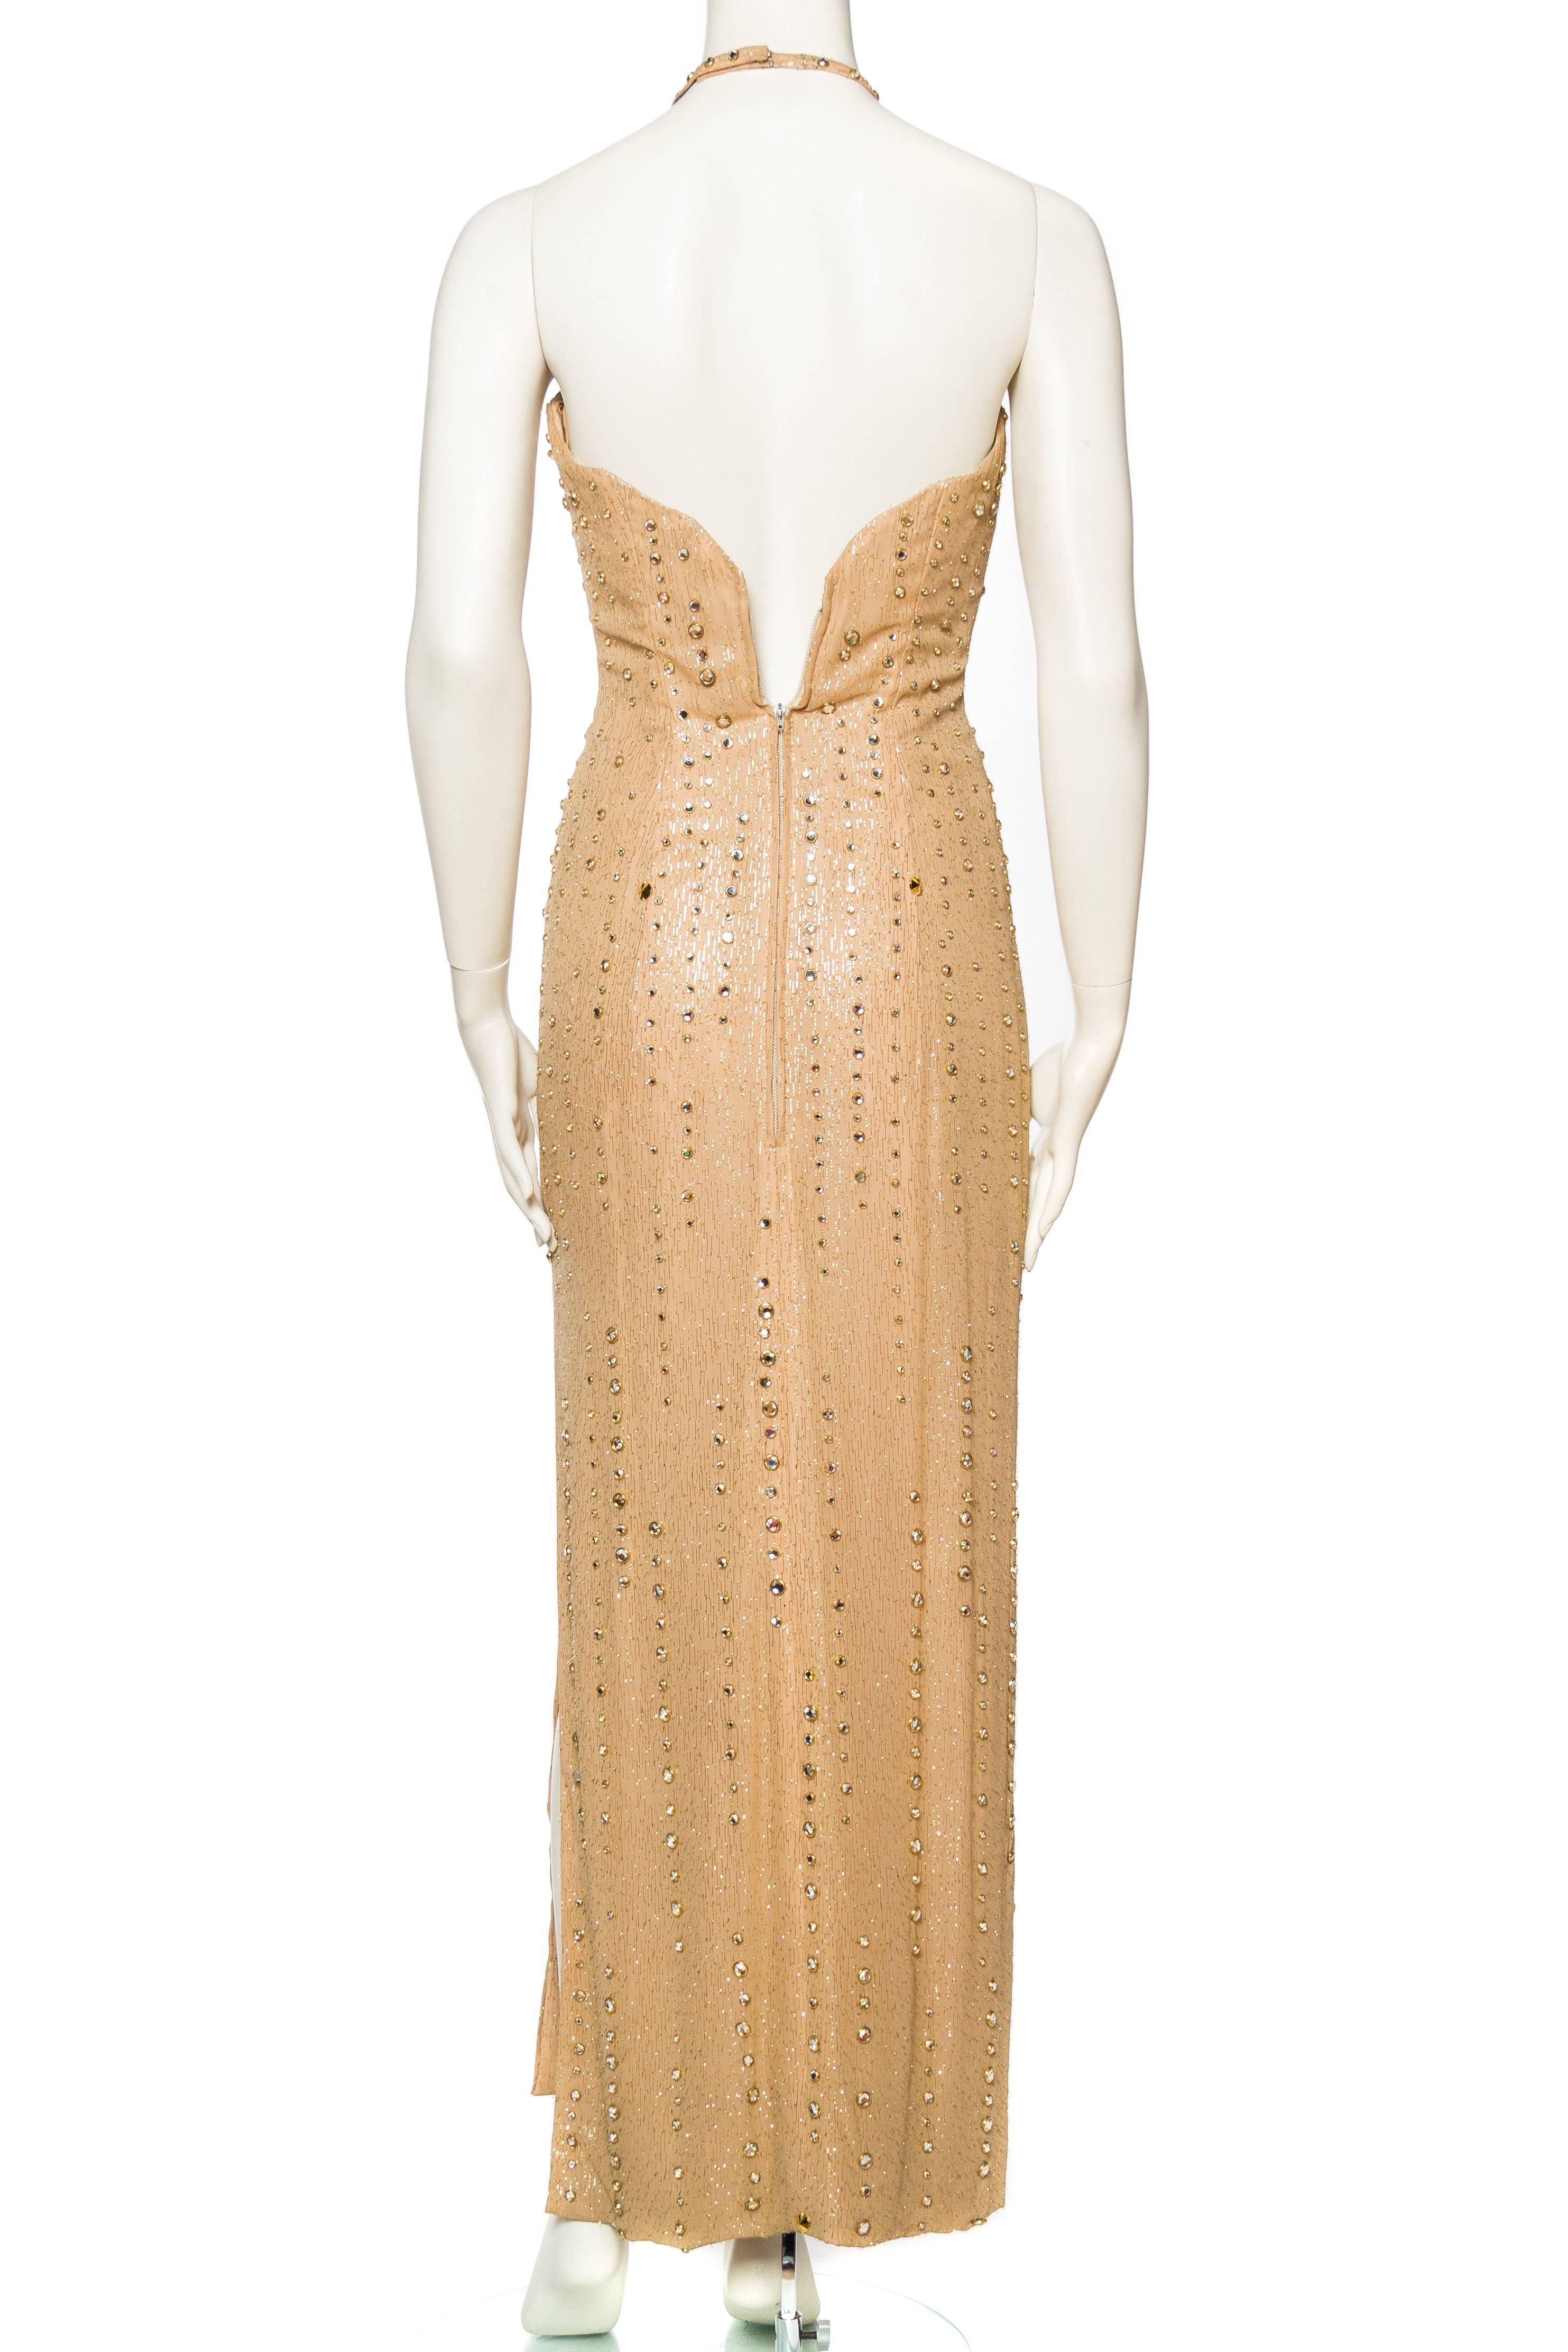 1970s Nude & Gold Halter Gown with Studs and Crystals 2